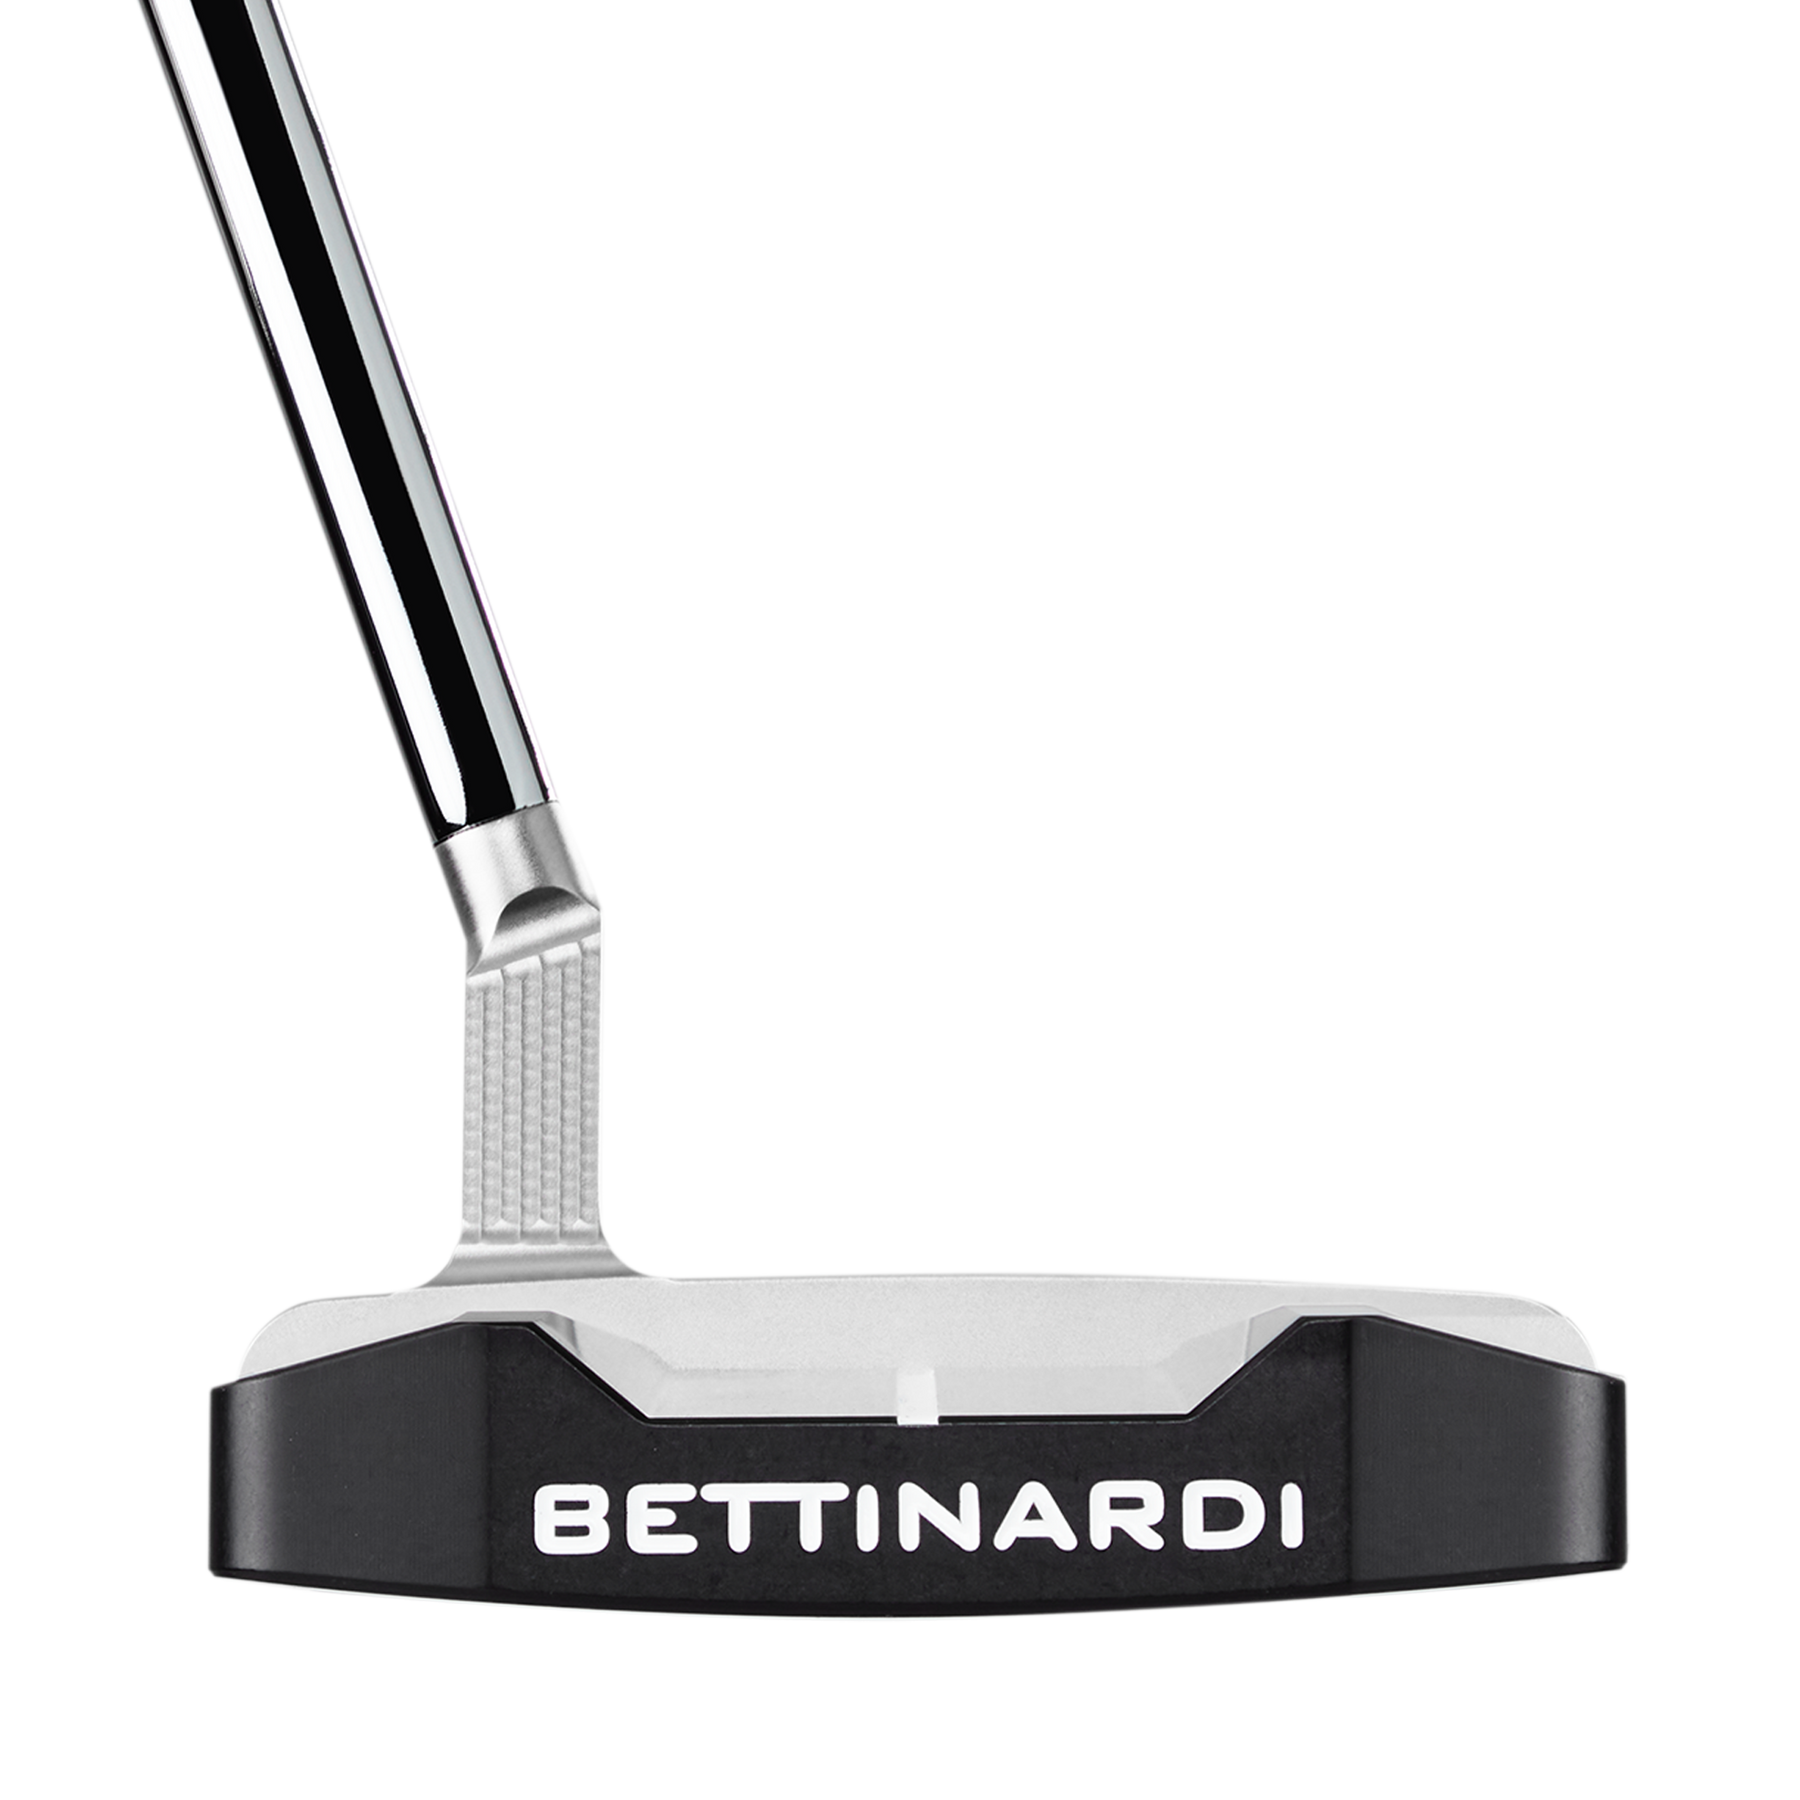 2022 INOVAI 8.0 Slant Neck Putter | Discover Yours Today! – Studio B